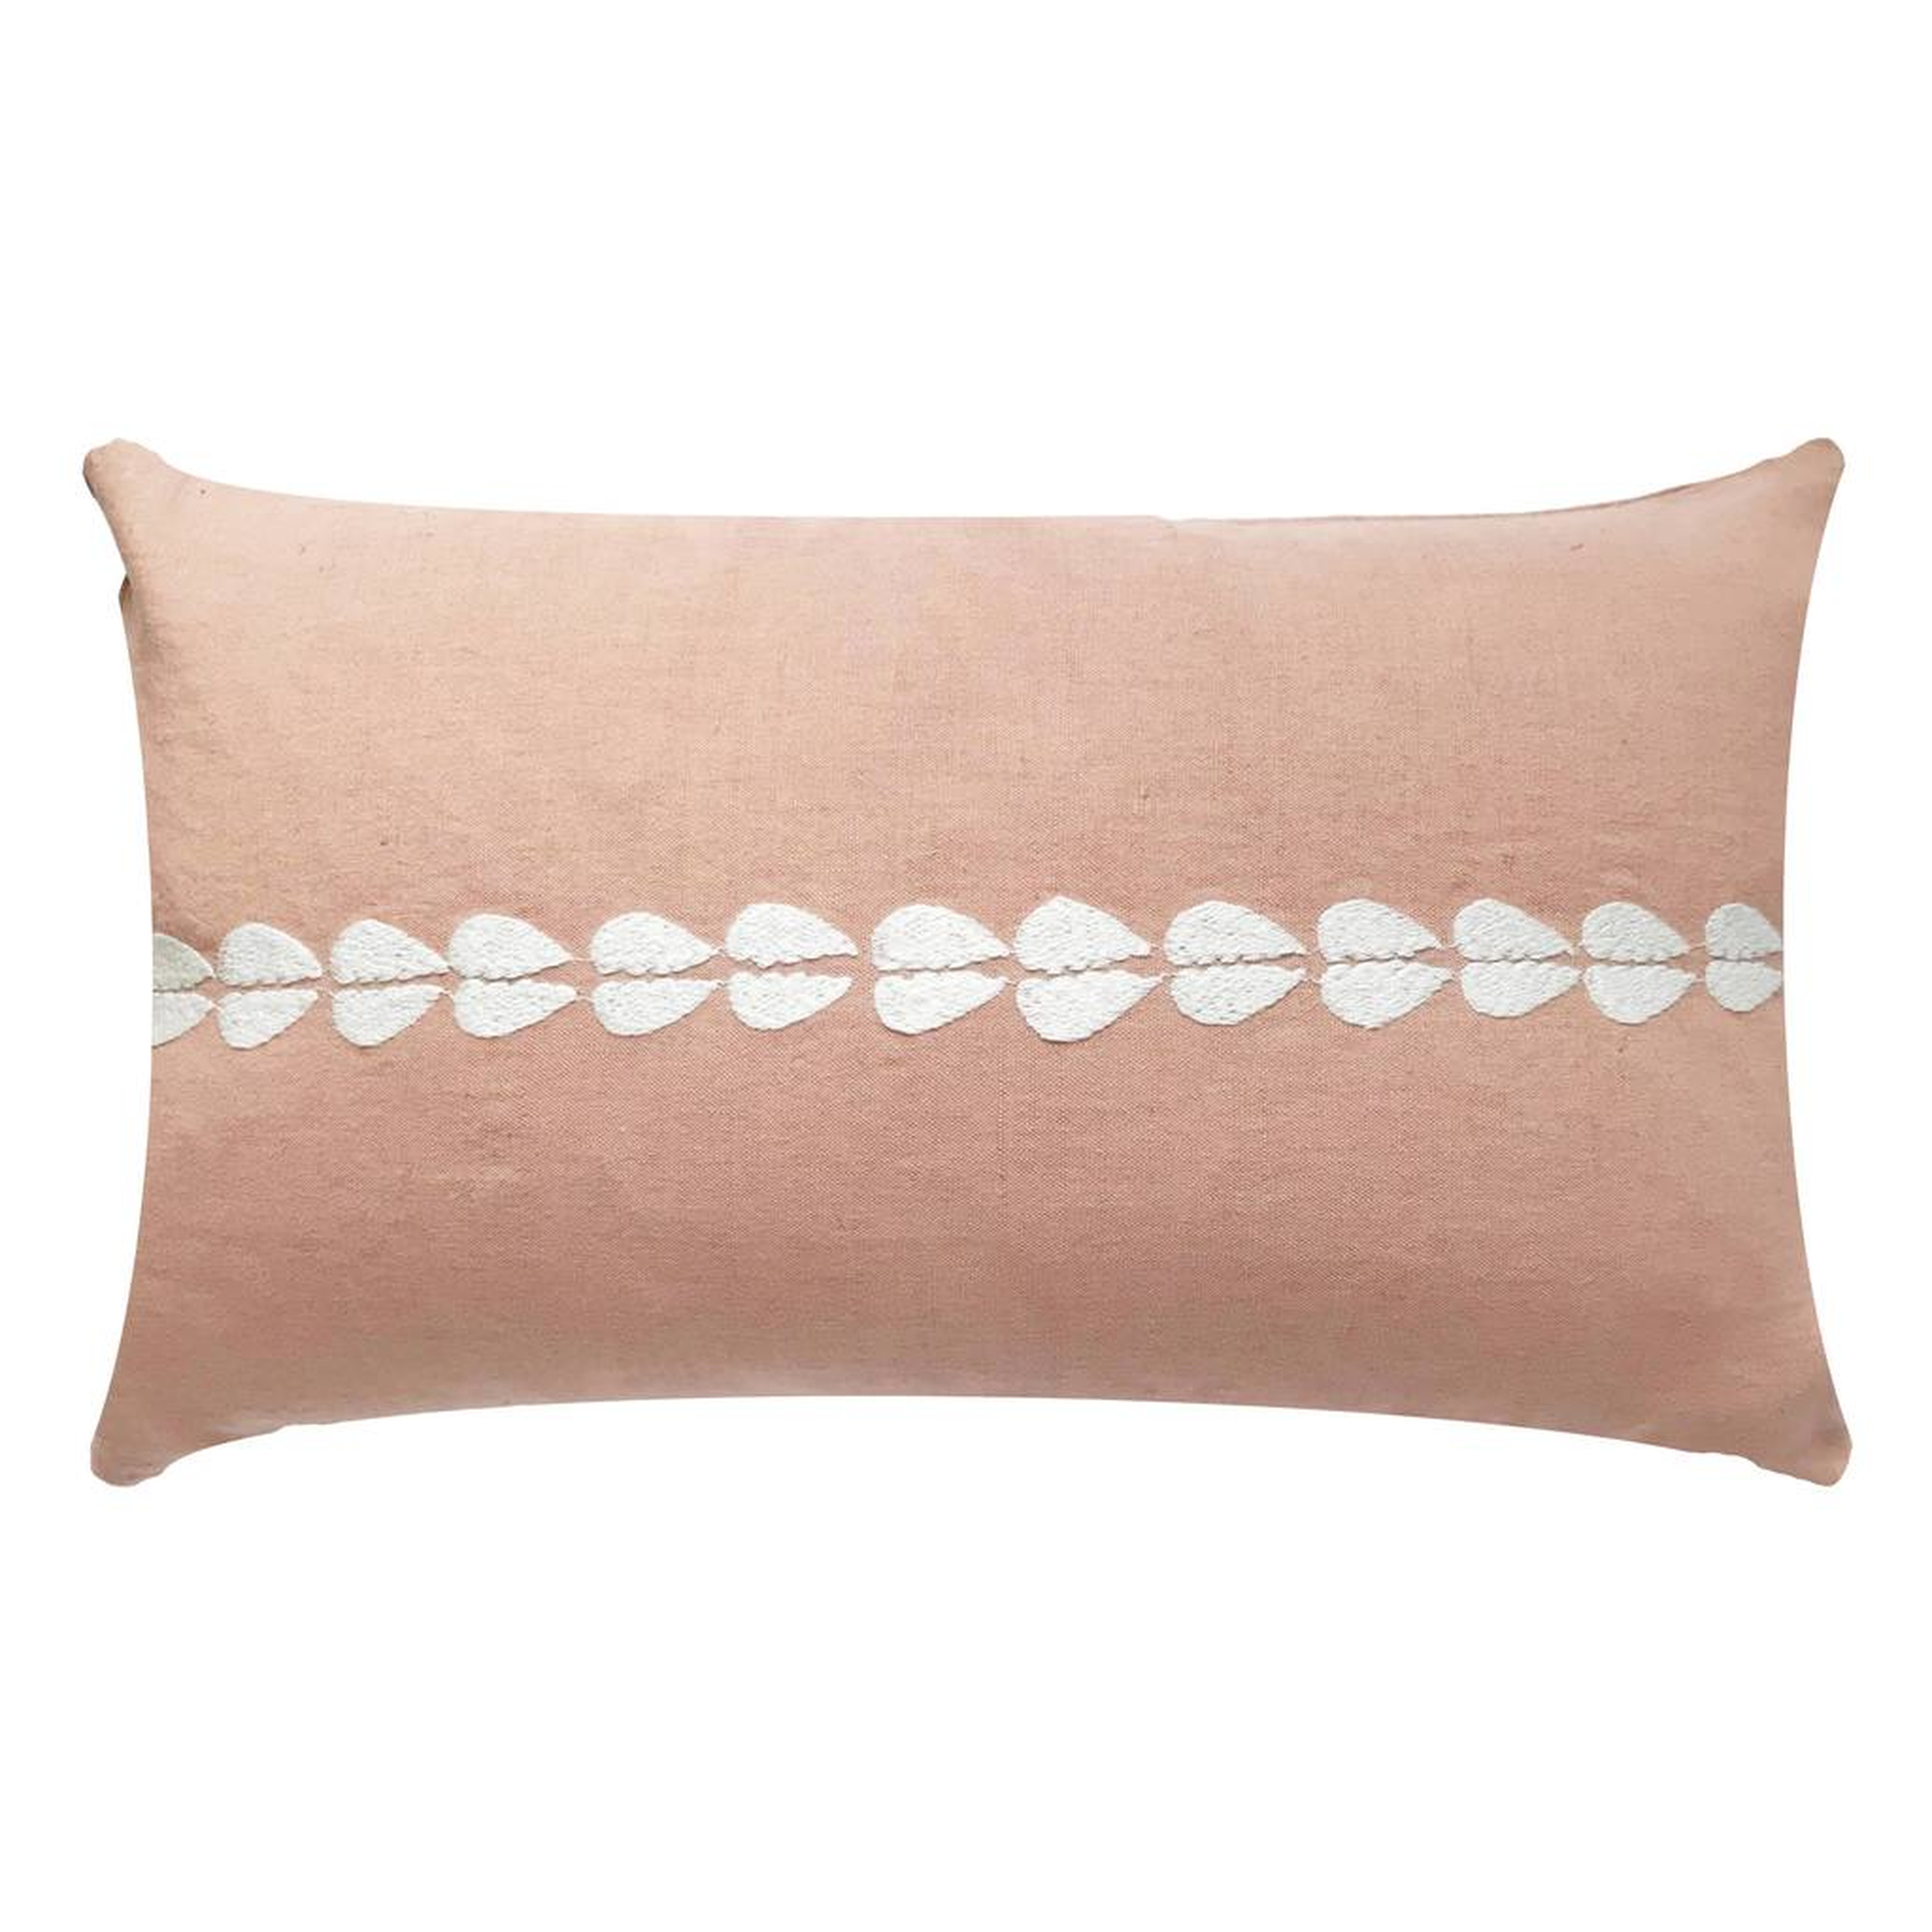 COWRIE EMBROIDERED LUMBAR PILLOW IN SHELL PINK (insert included) - PillowPia